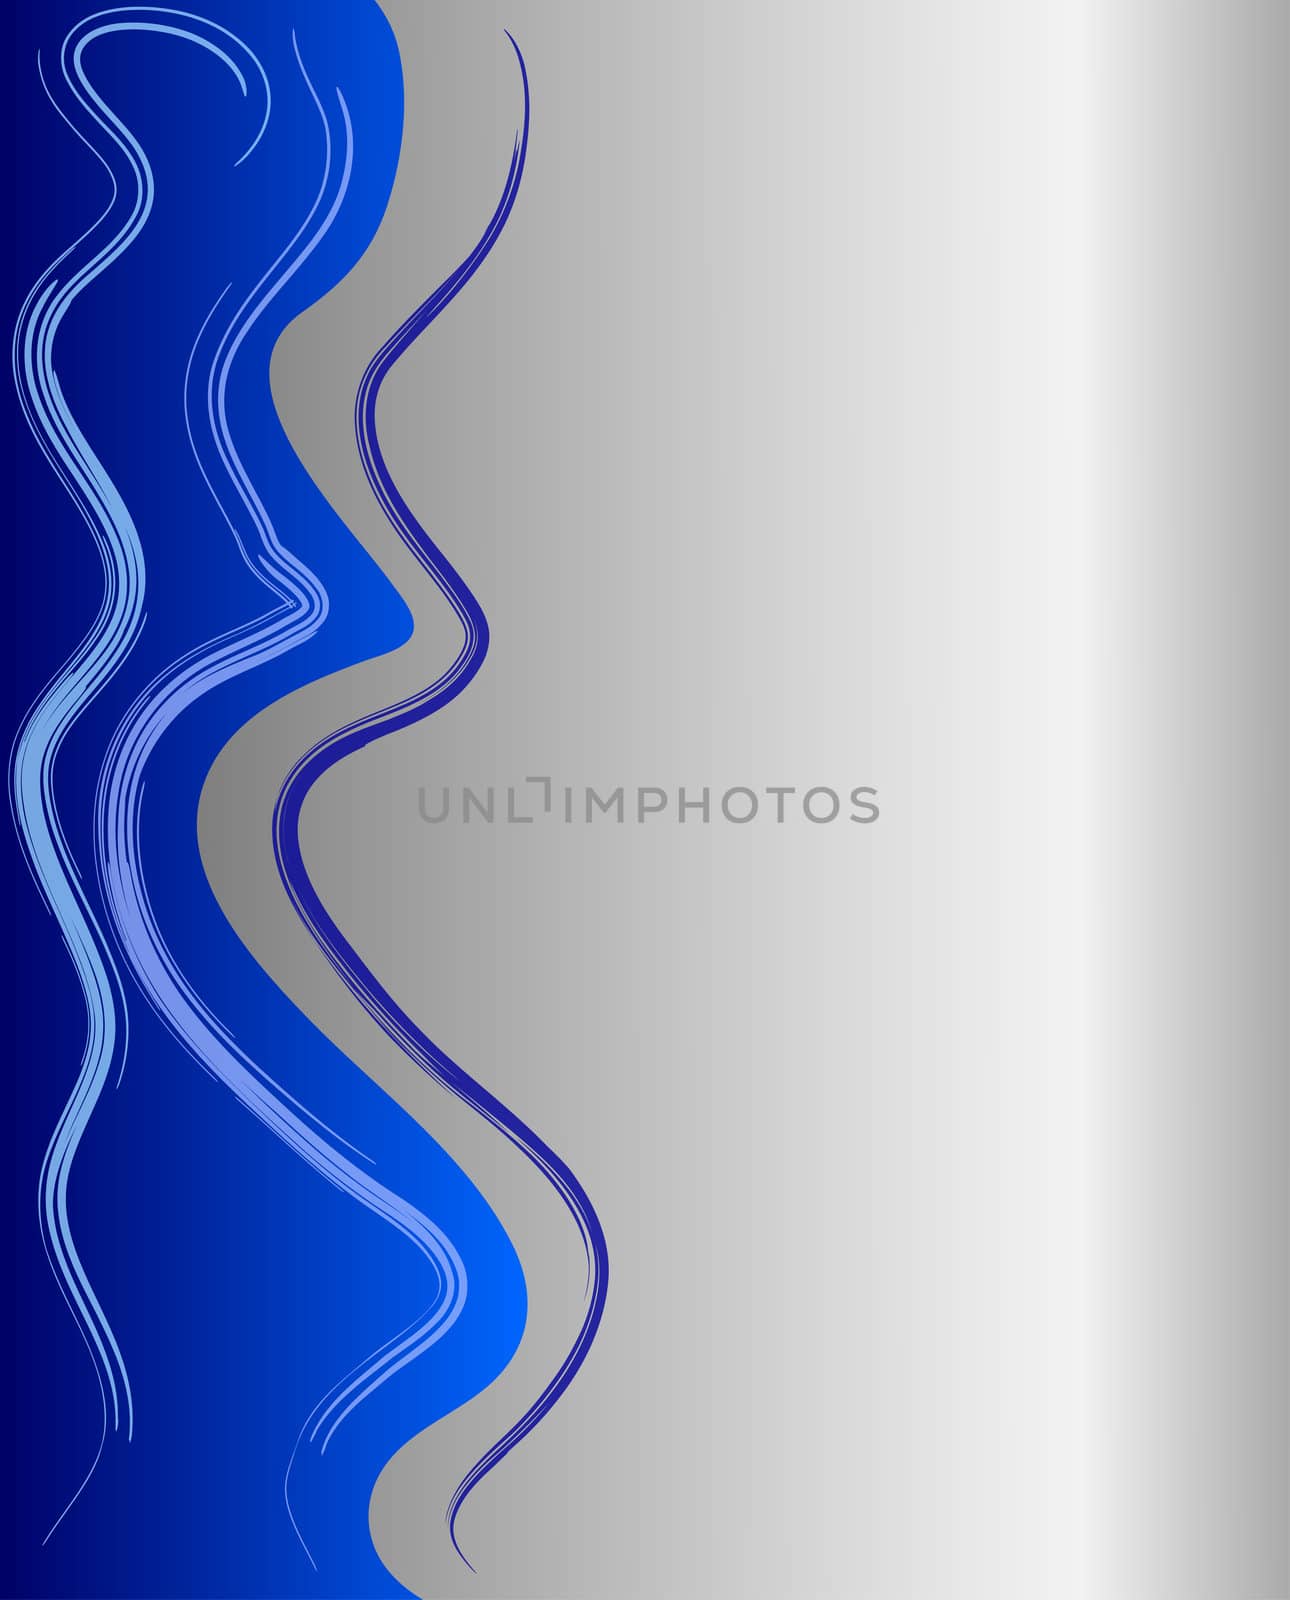 illustration of a silver abstract decoration background by peromarketing